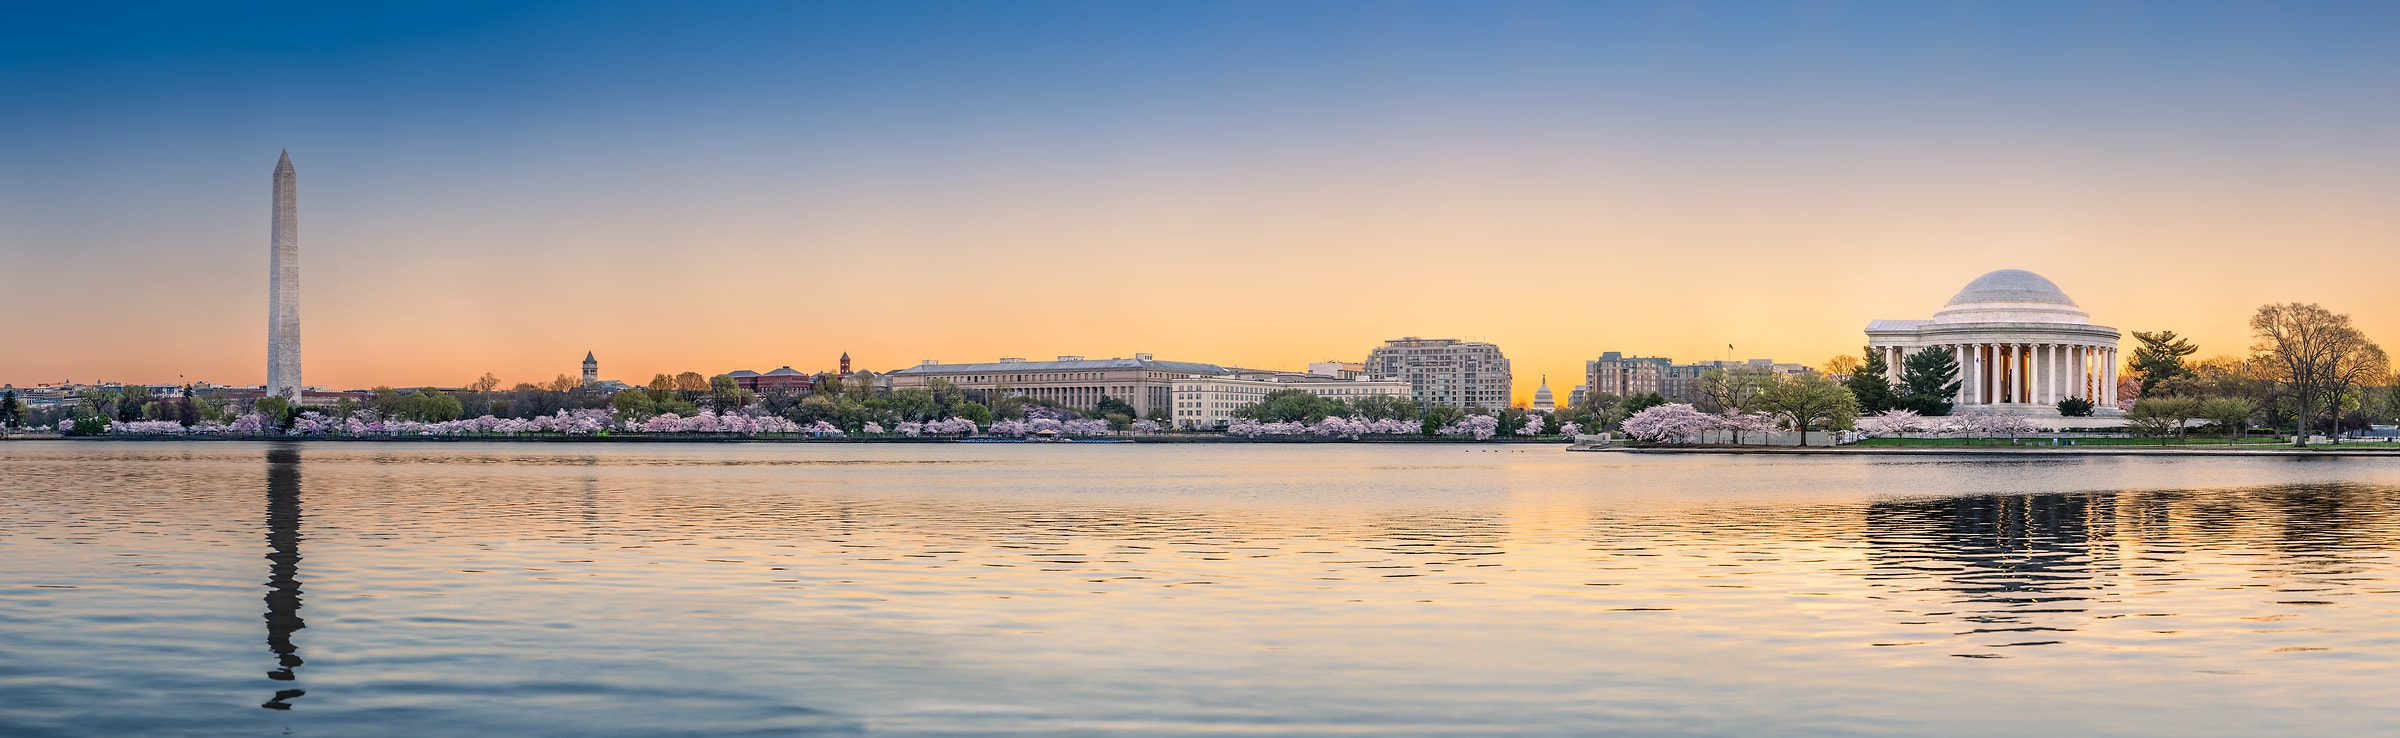 1,561 megapixels! A very high resolution, large-format VAST photo print of the Tidal Basin with the Washington Monument, Jefferson Memorial, U.S. Capitol Building, and cherry blossoms at sunrise; panorama photograph created by Tim Lo Monaco on the National Mall in Washington, D.C.